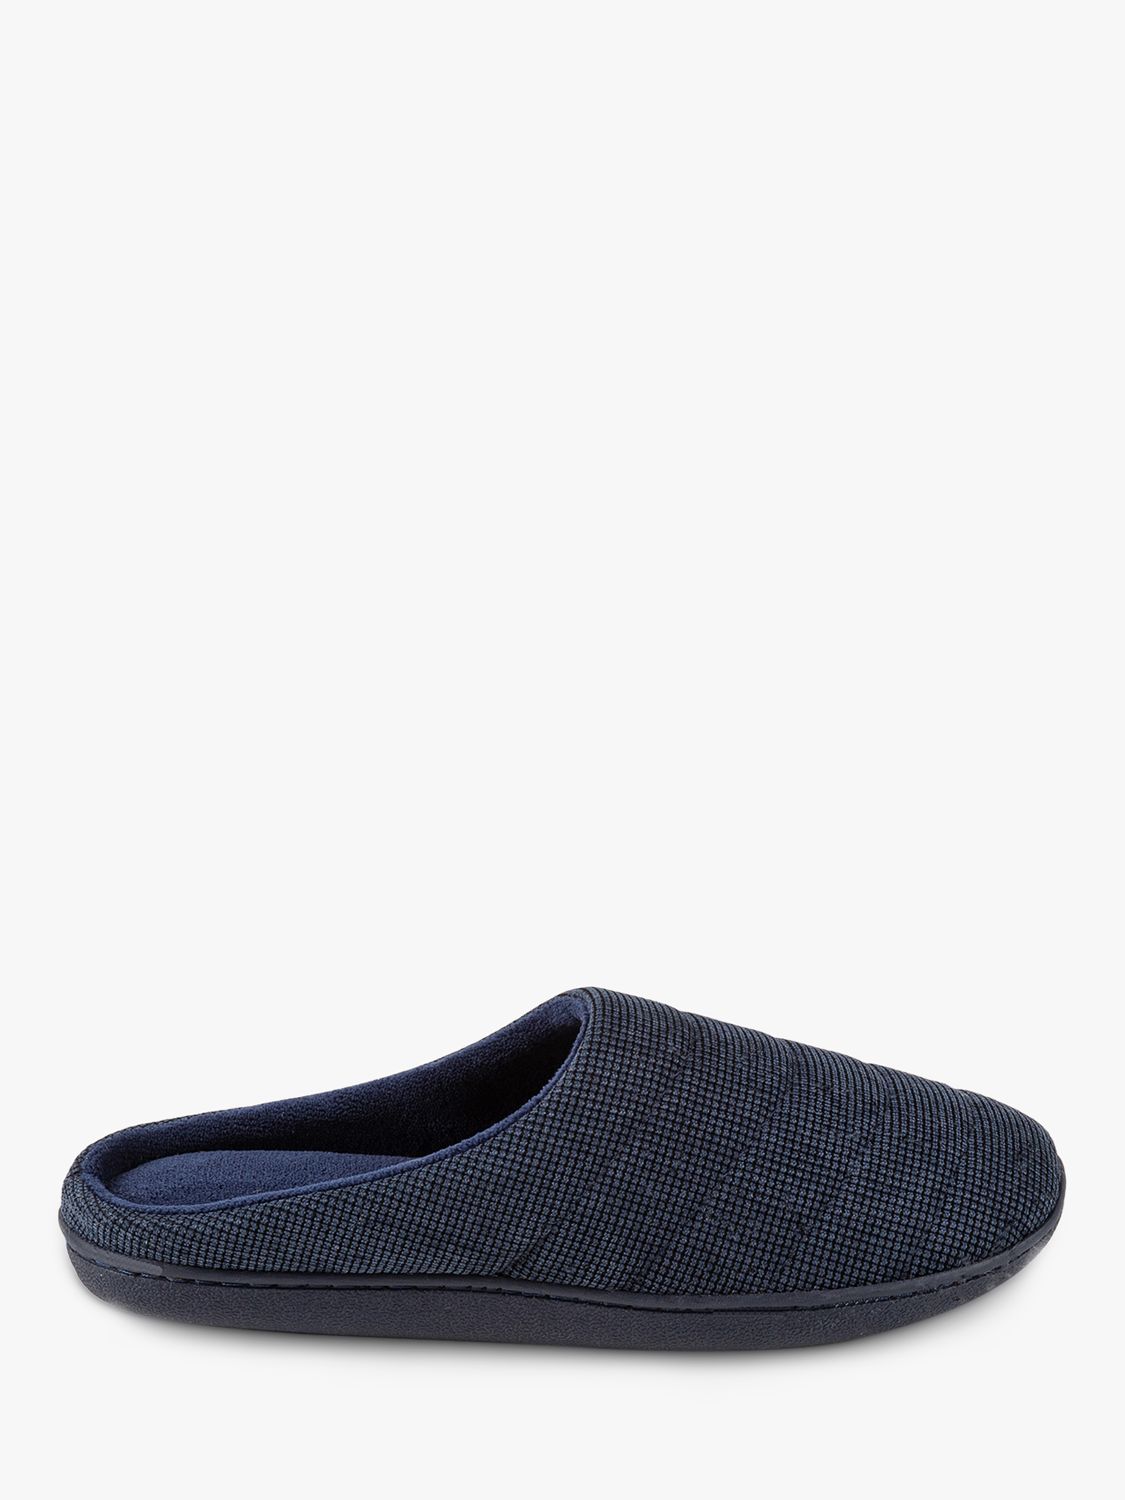 totes Isotoner Textured Cord Stitched Mule Slippers, Navy at John Lewis ...